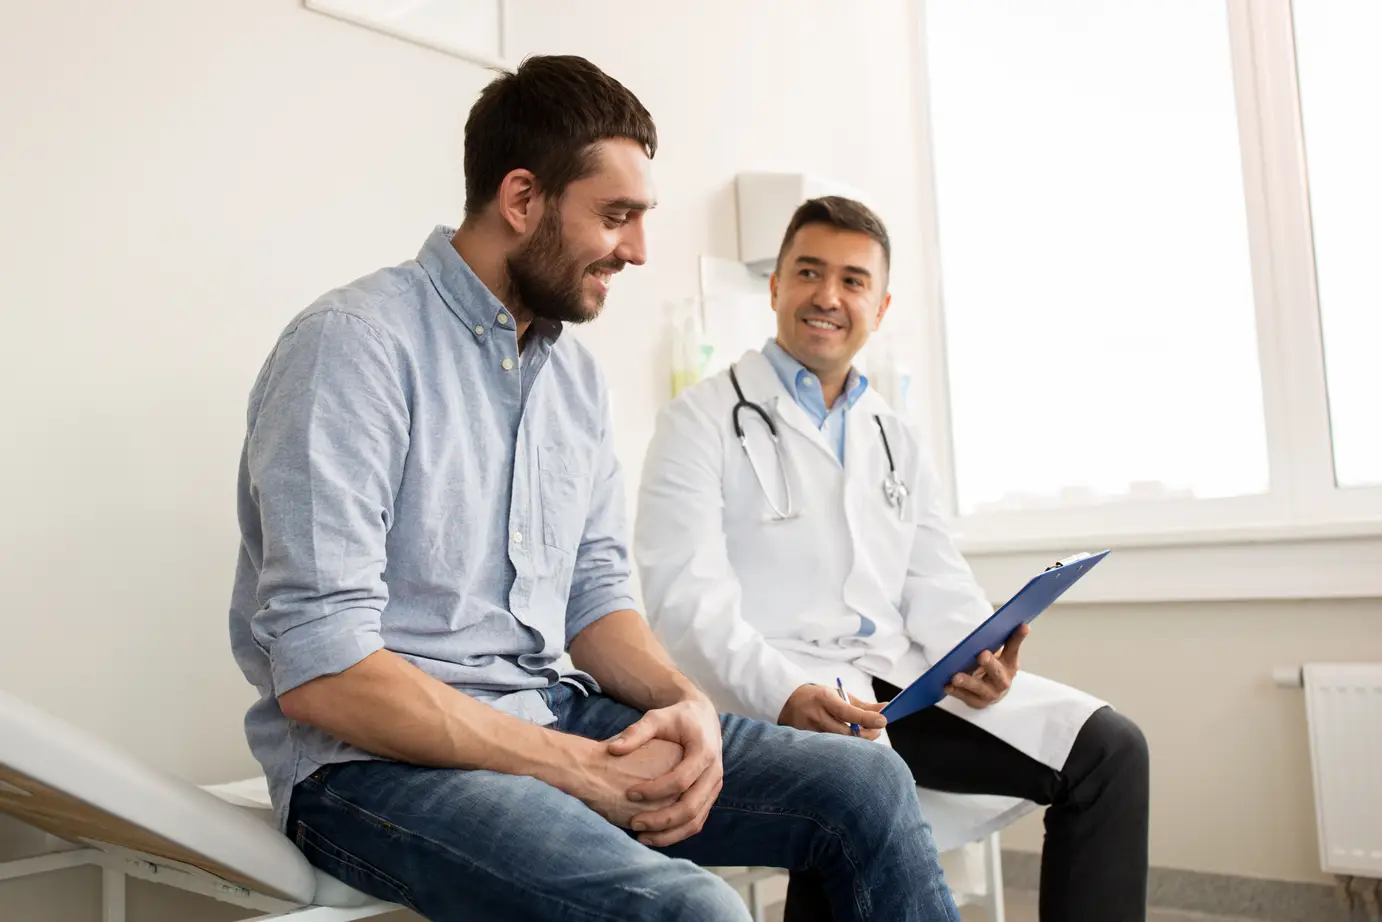 Doctor and patient talking in an exam room